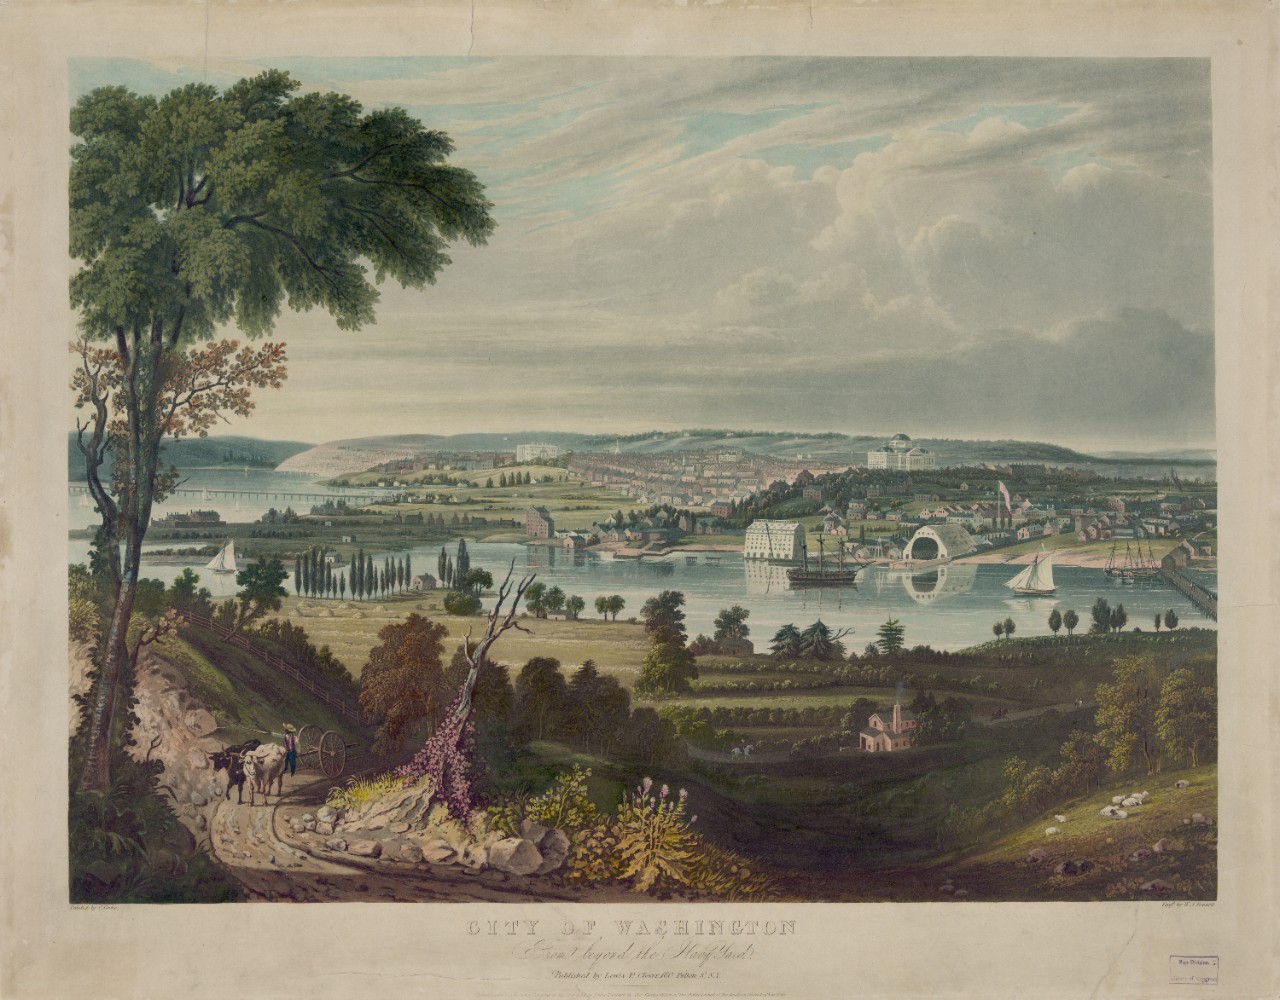 Washington, D.C., circa 1833.    LC-DIG-PGA-00192:  City of Washington from beyond the Navy Yard, probably from 1833.   Painting by G. Cooke, engraving by W.J. Bennett.   Courtesy, Library of Congress.   